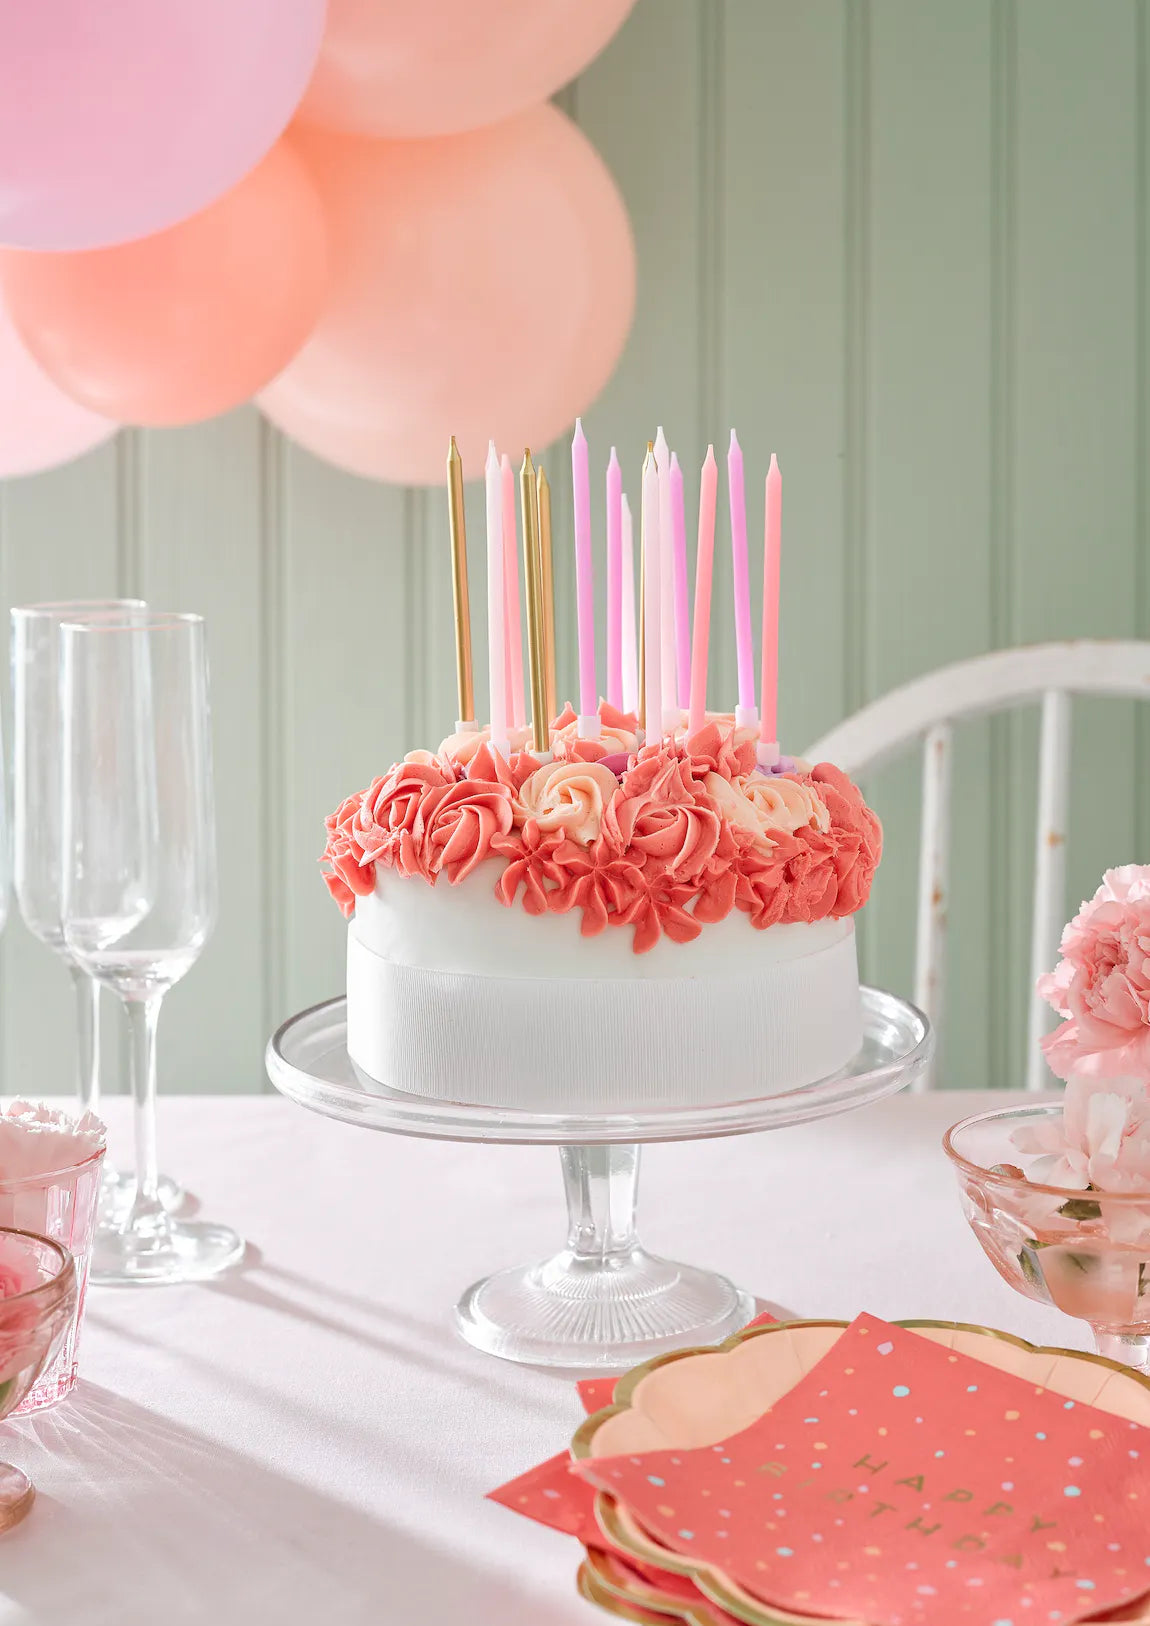 Long Pink & Gold Birthday Candle Pack By Talking Tables